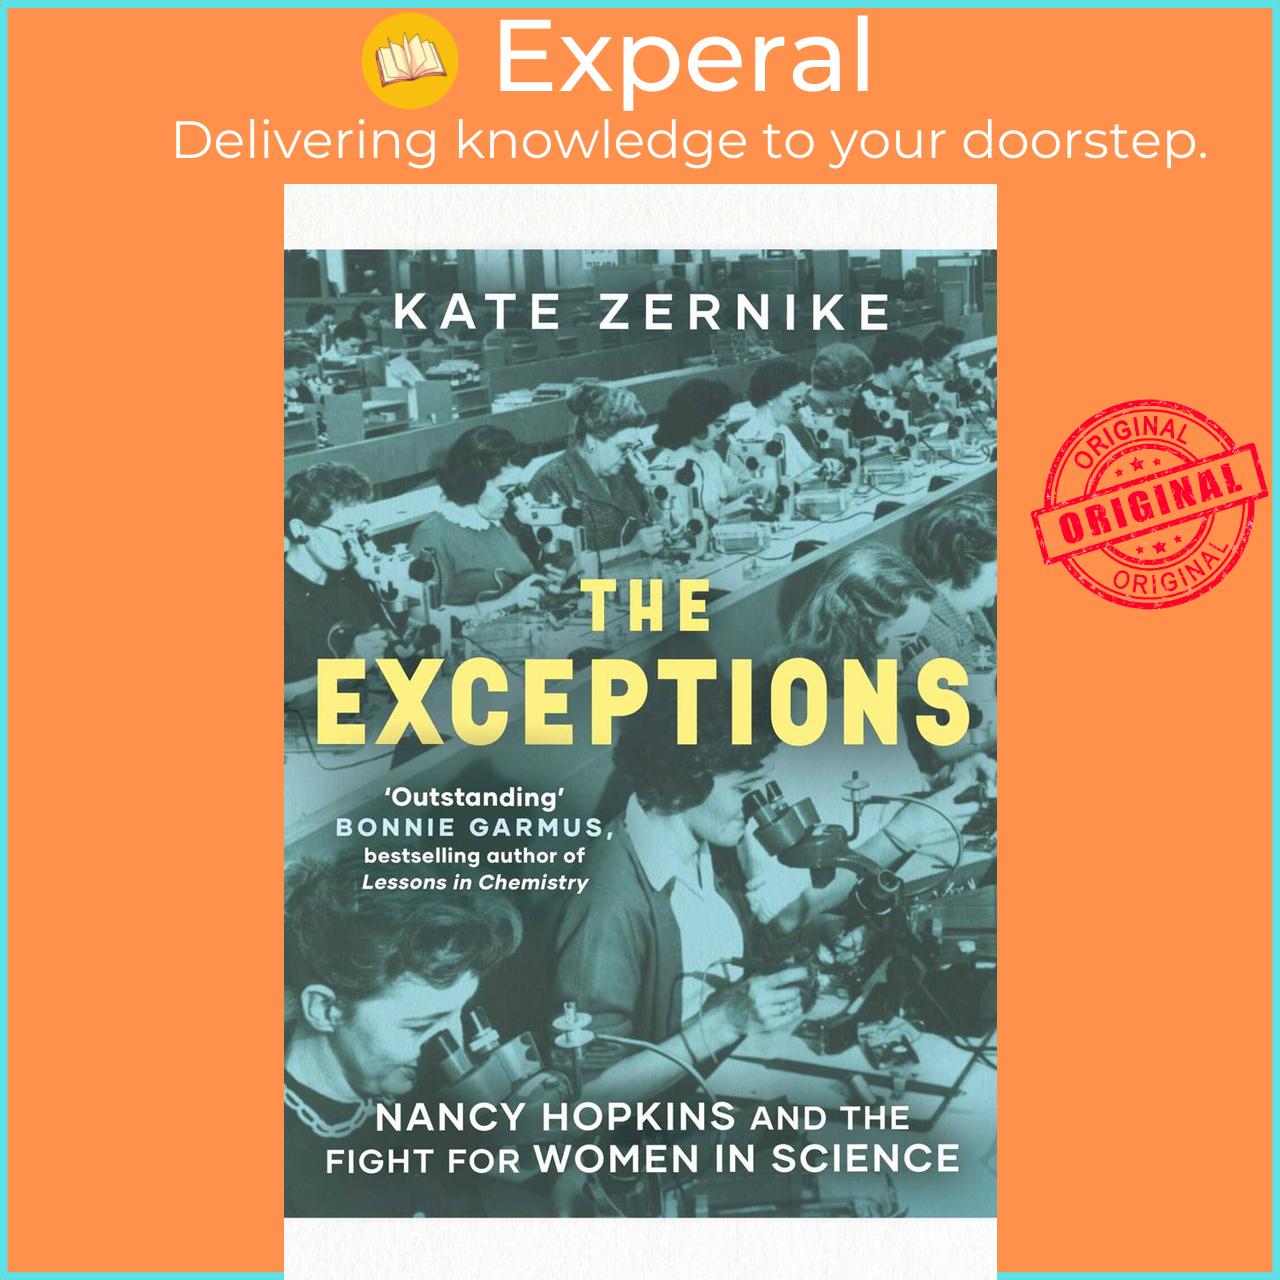 Sách - The Exceptions - Nancy Hopkins and the fight for women in science by Kate Zernike (UK edition, paperback)